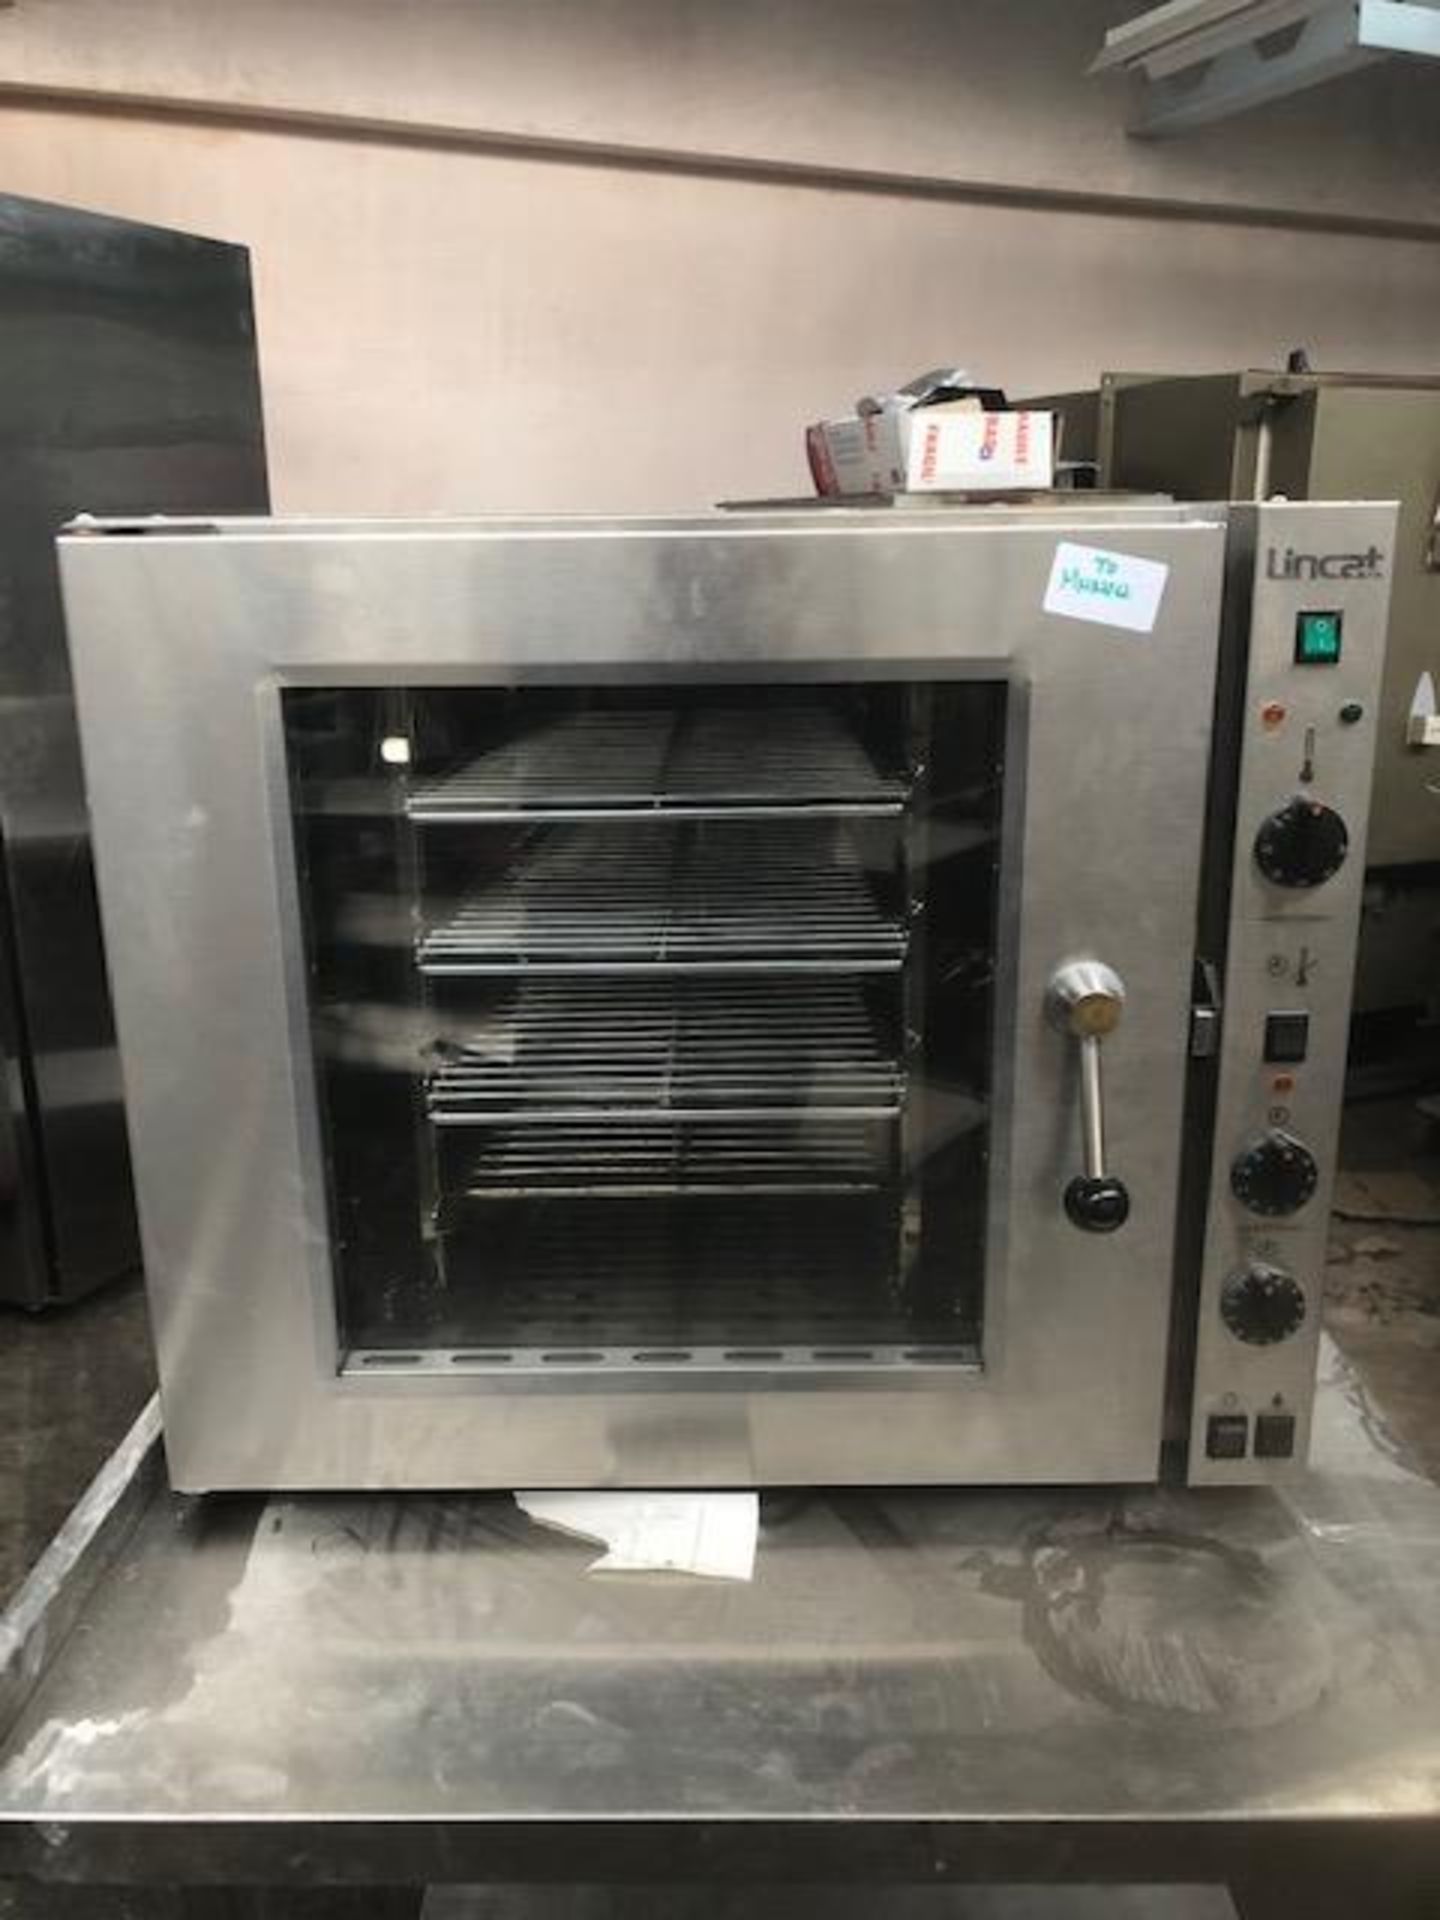 Lincat SN 21610512 Large Counter top Convection Oven